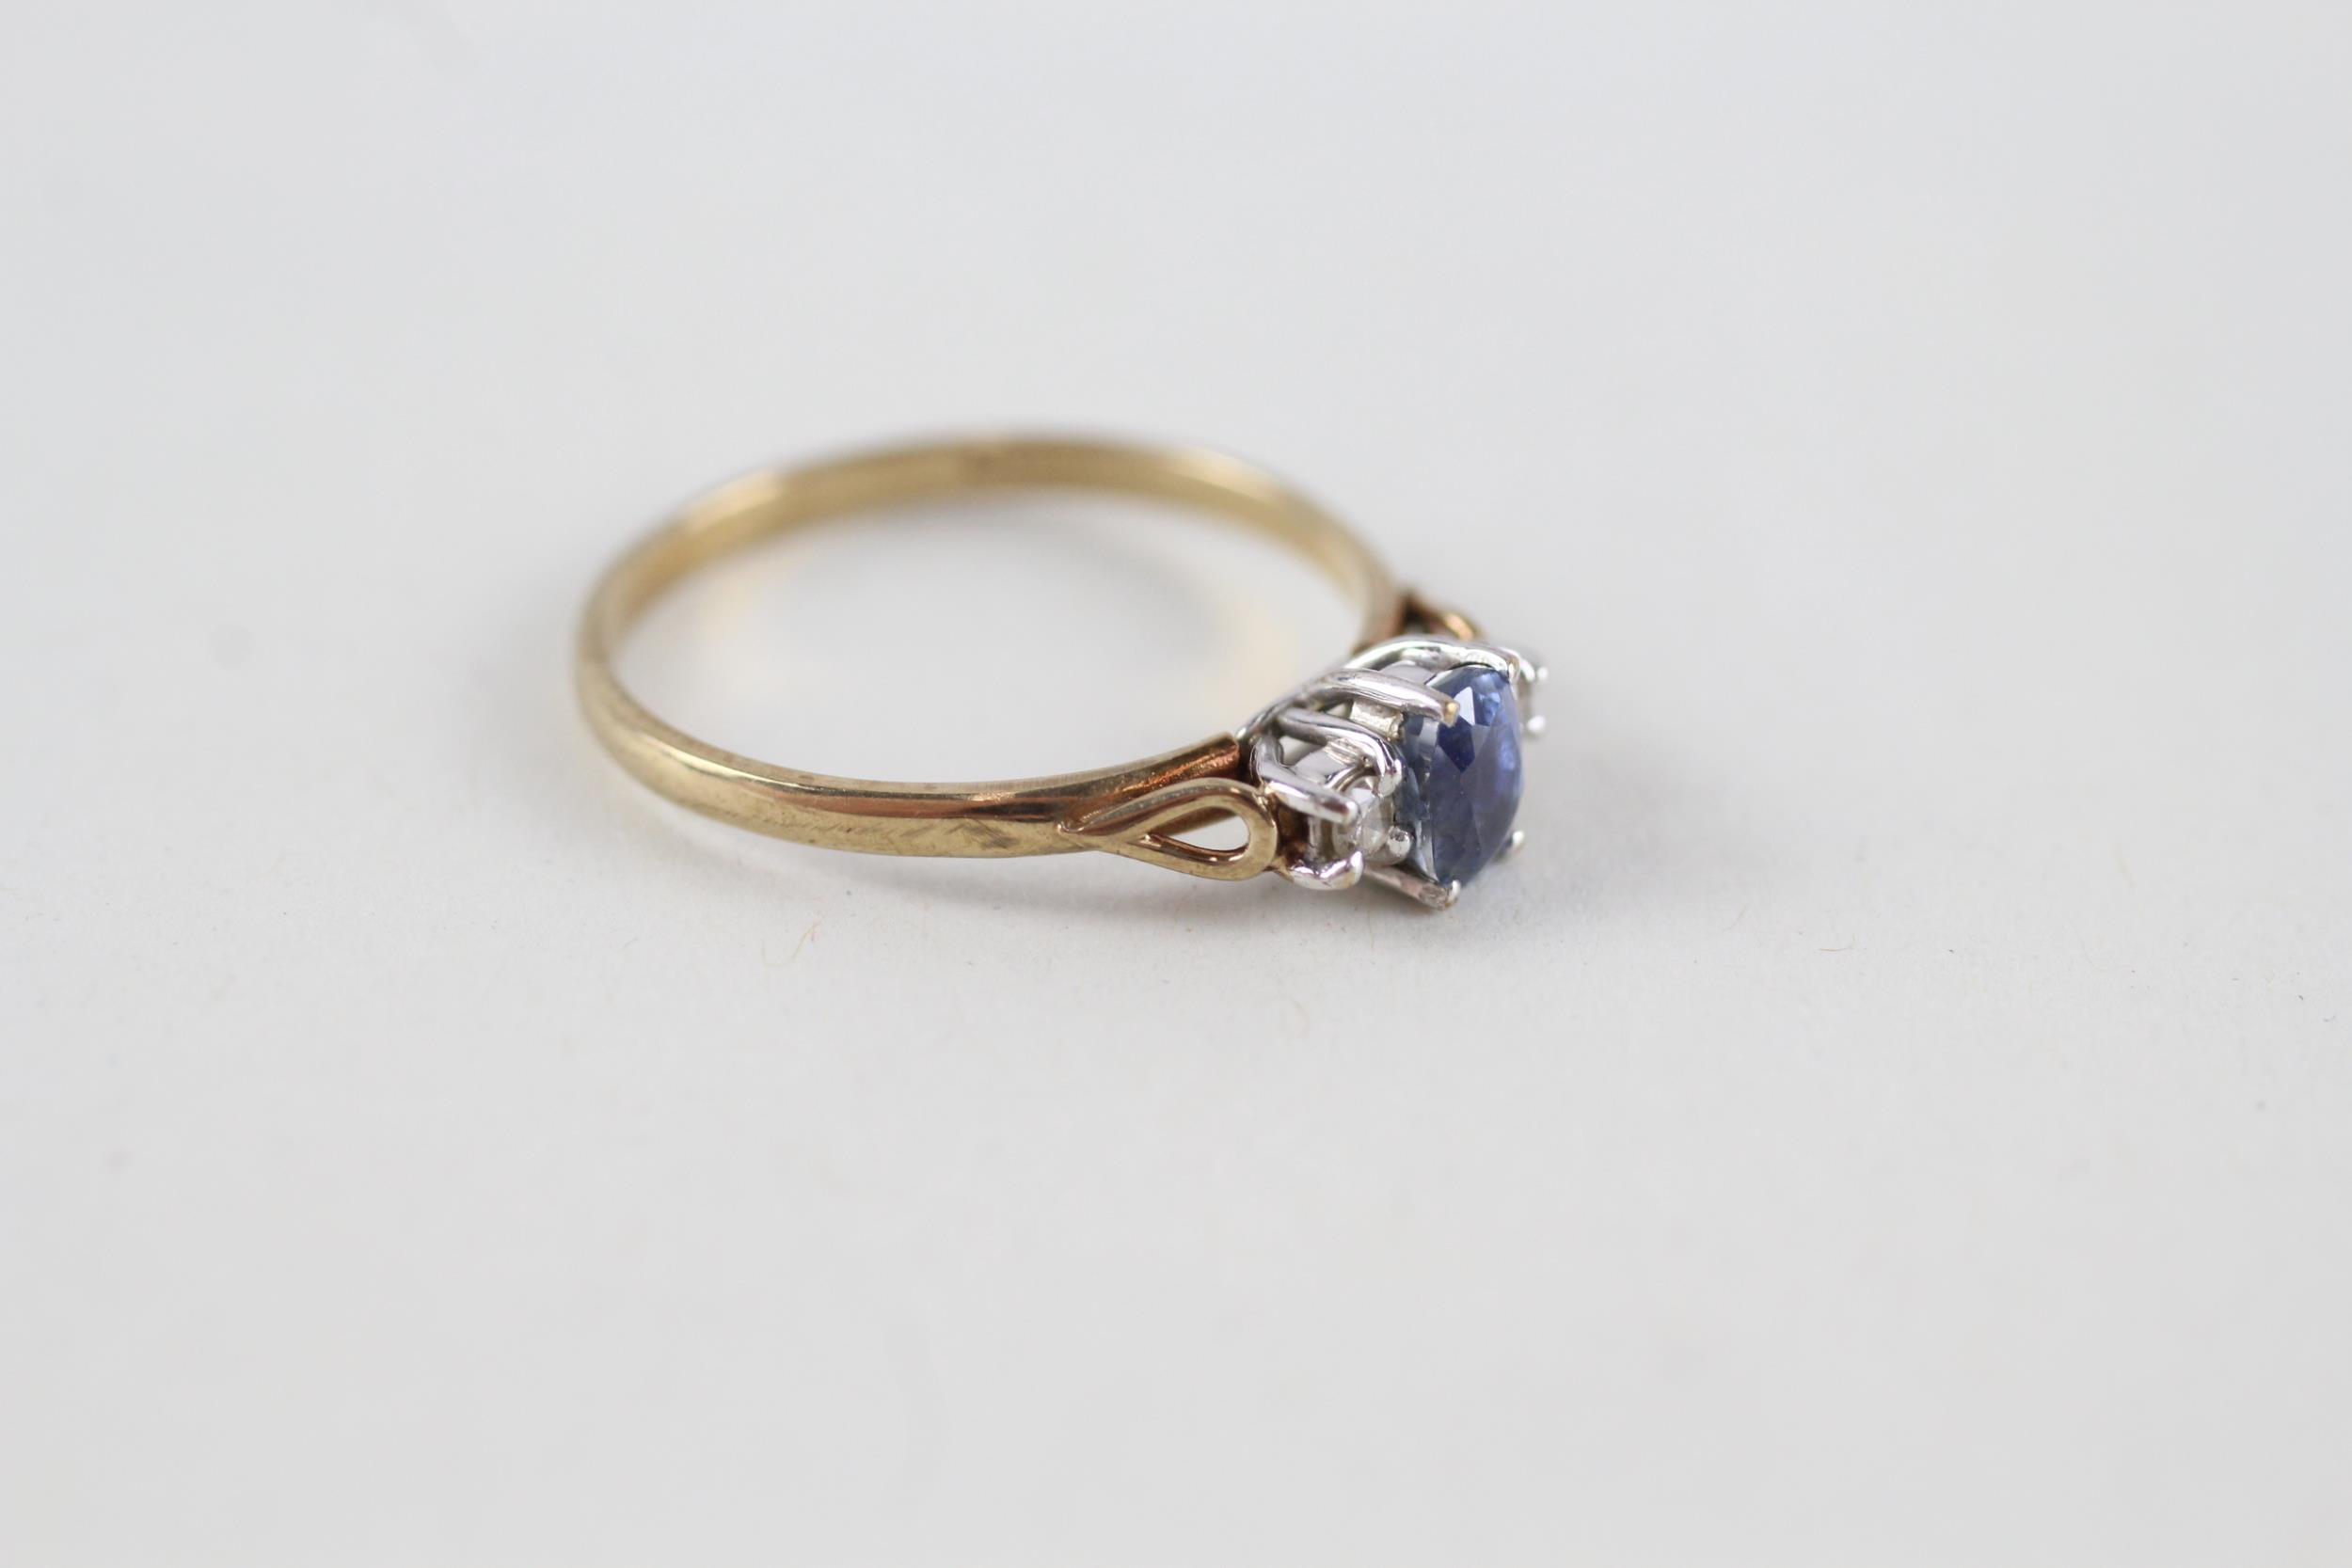 9ct gold oval cut sapphire & diamond three stone ring, claw set (1.3g) Size L - Image 2 of 4